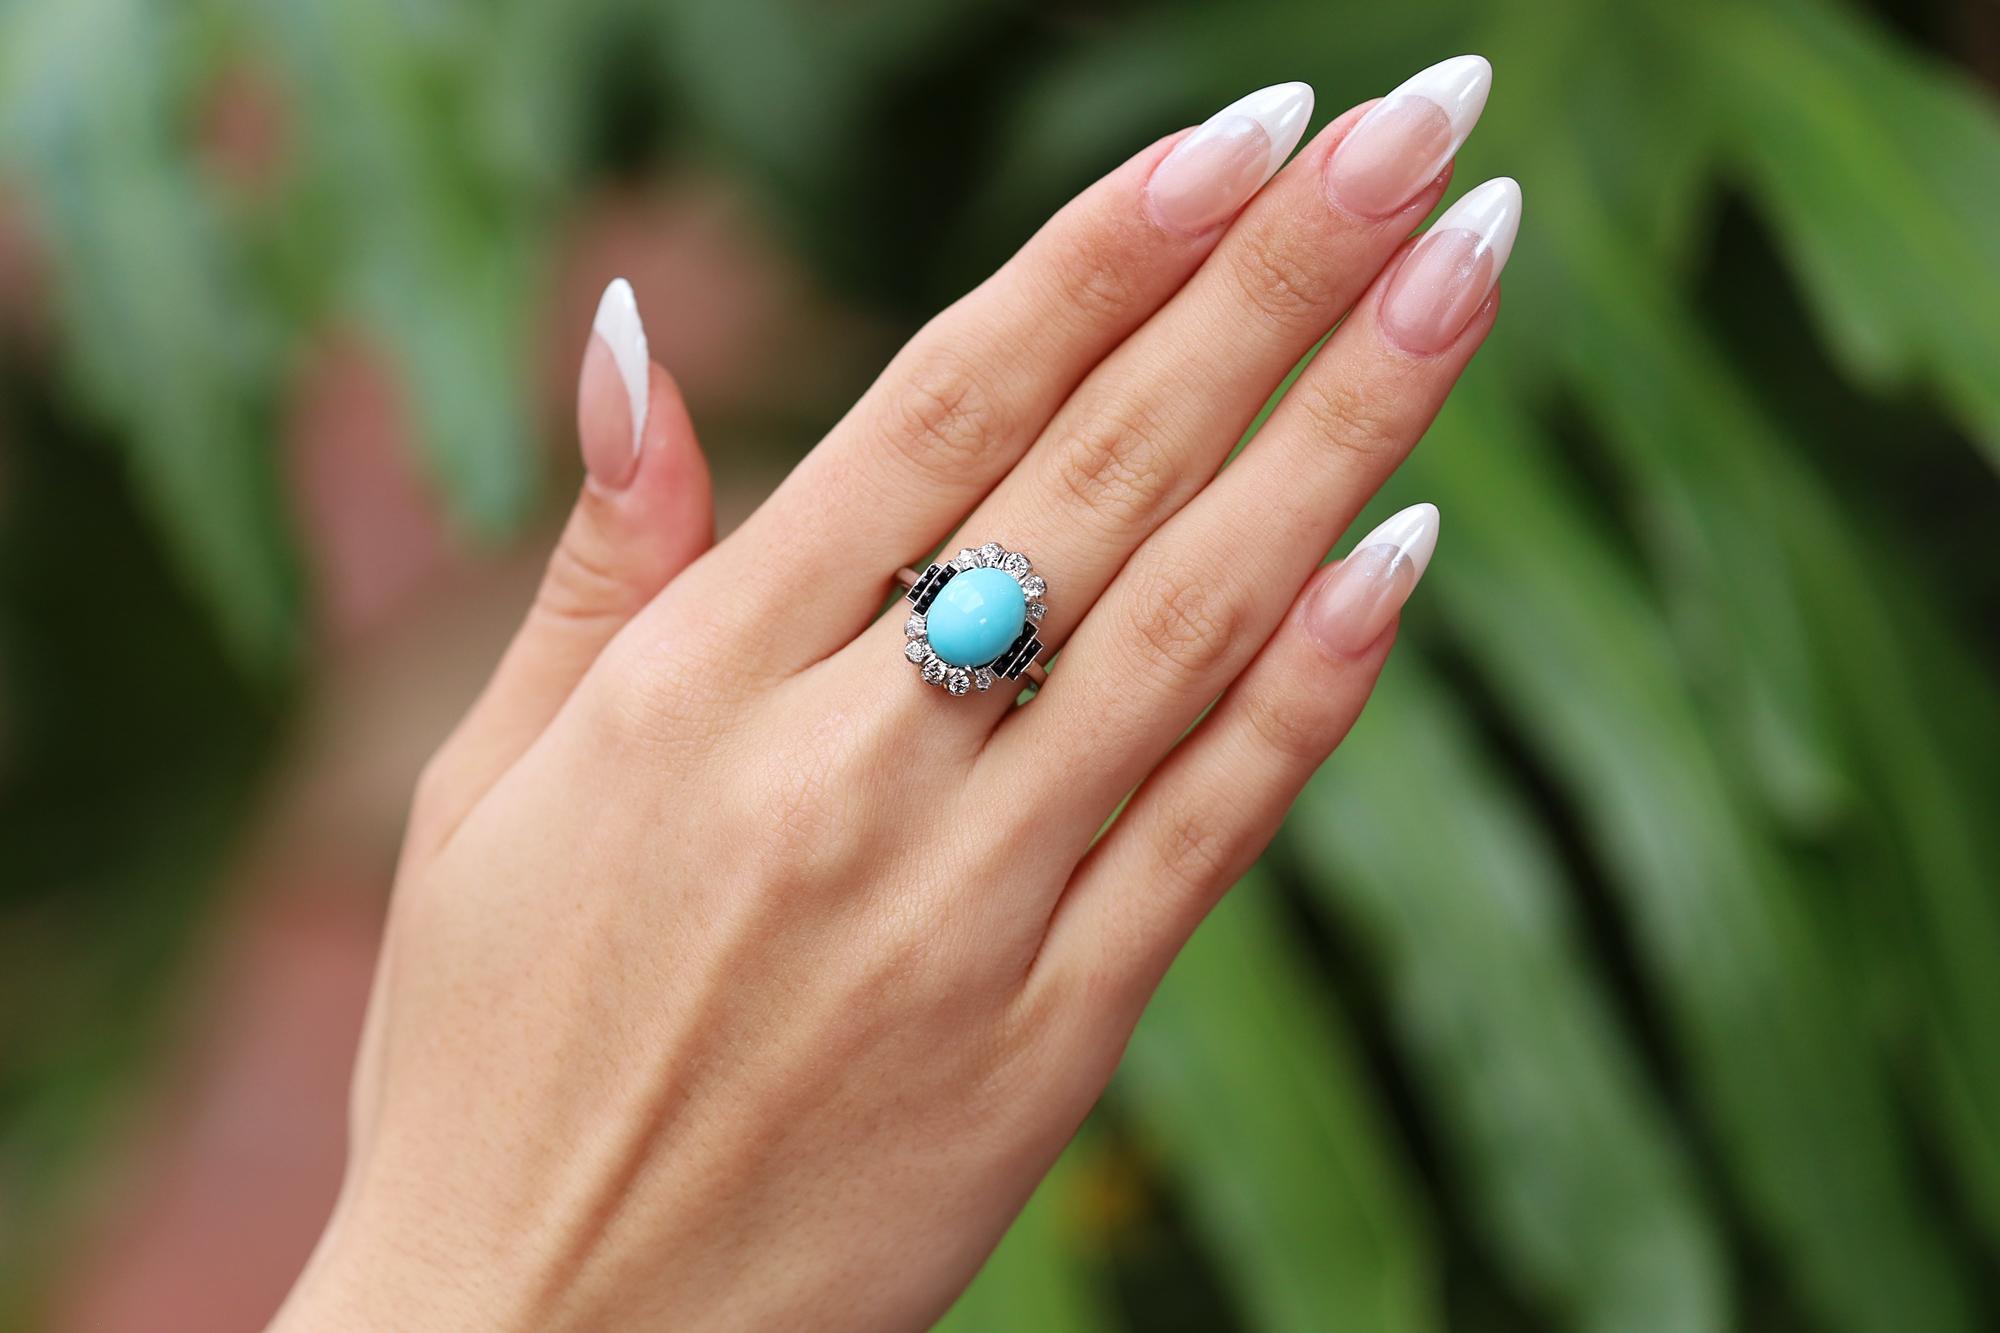 Our bespoke Art Deco style cocktail ring featuring a pure and beautiful robin's egg blue turquoise is simply sublime. The smooth and lustrous cabochon gemstone acquires a striking contrast with sleek, black onyx cabochons and diamond shoulders along